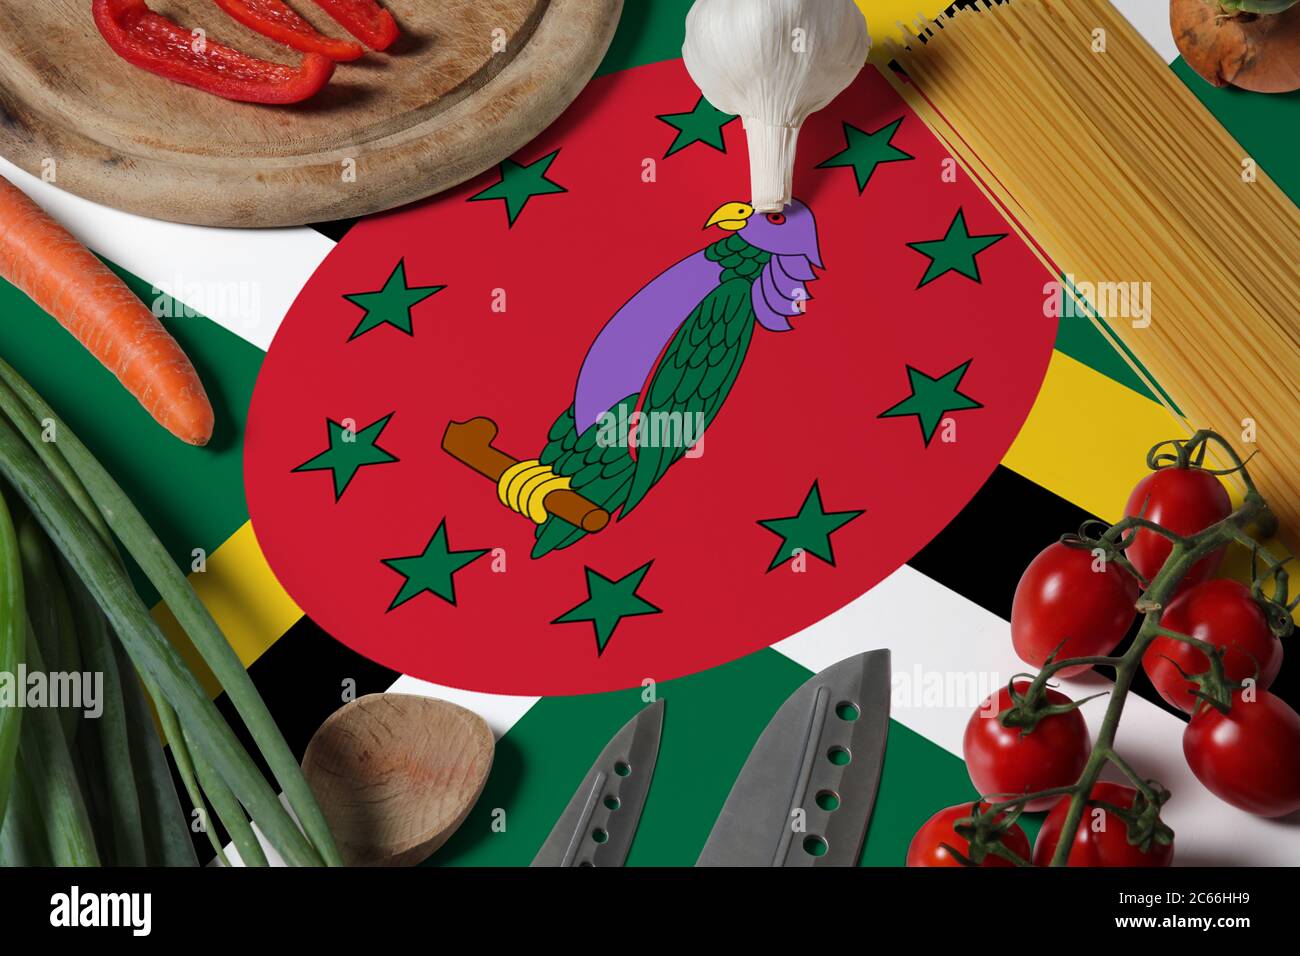 Dominica flag on fresh vegetables and knife concept wooden table. Cooking concept with preparing background theme. Stock Photo